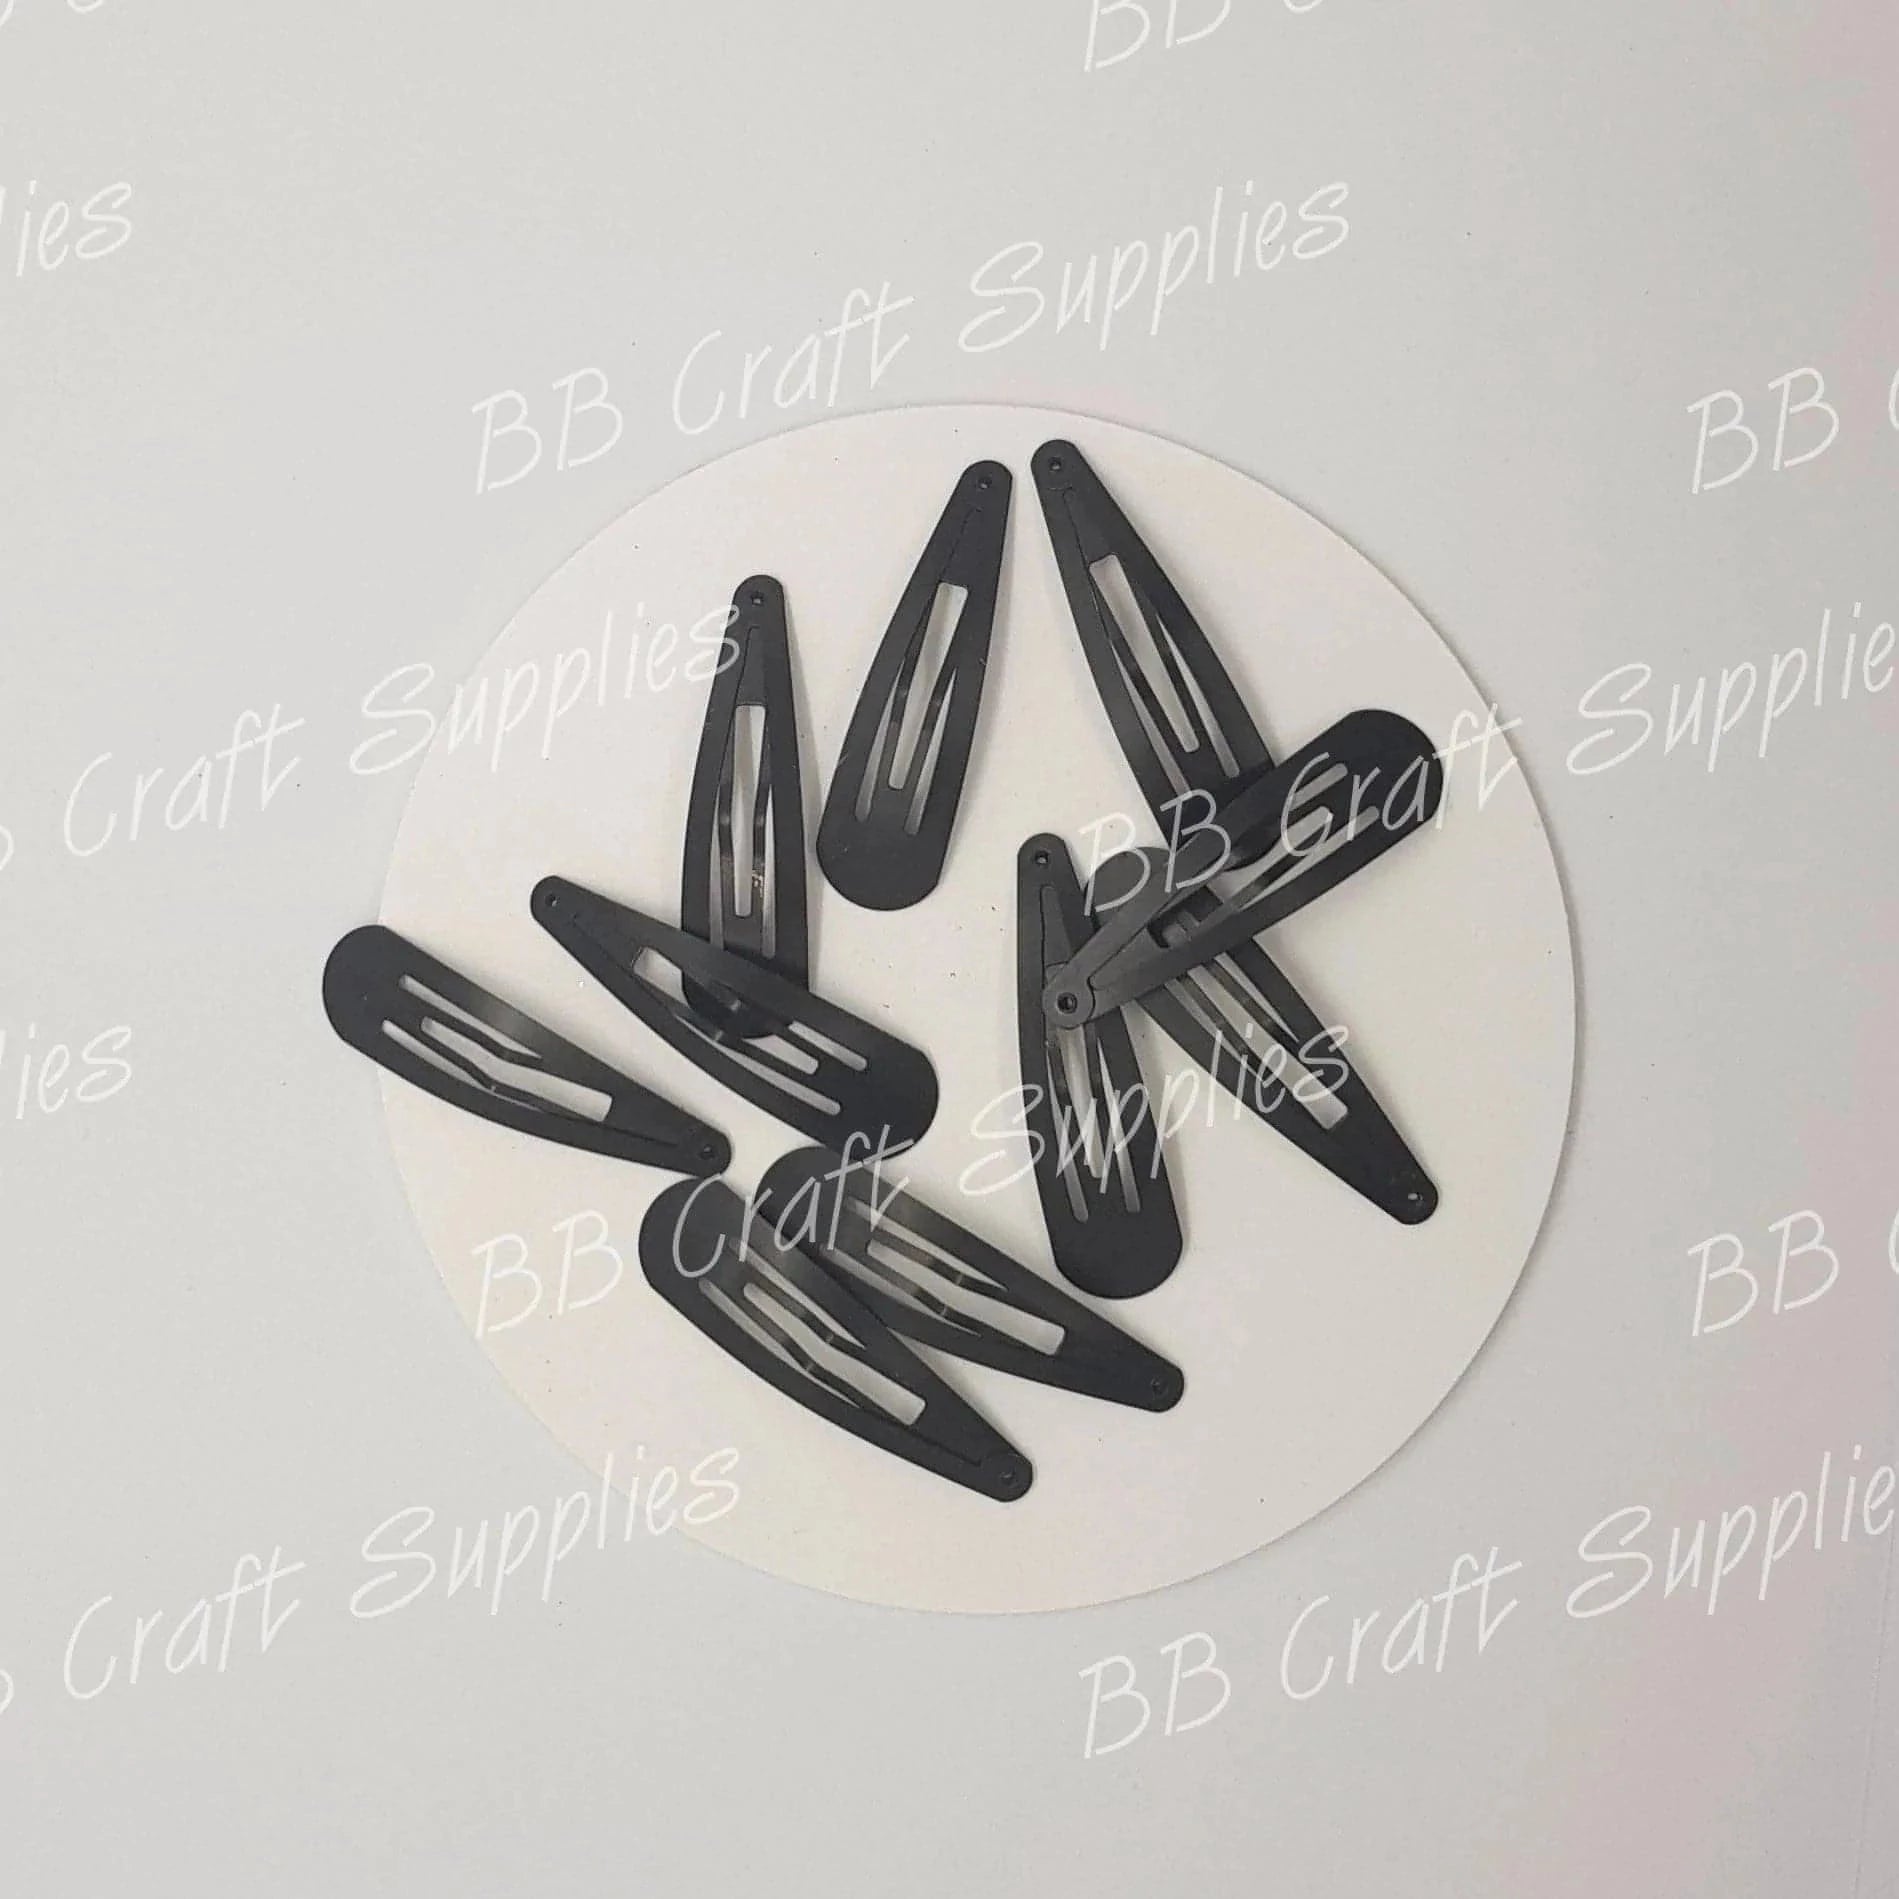 Clearance - Snap Clips 7 cm - 10 Pack - accessories, black, clear, clearance, clips, Embelishment, Hair, Hair clips, snap clip - Bare Butler Faux Leather Supplies 